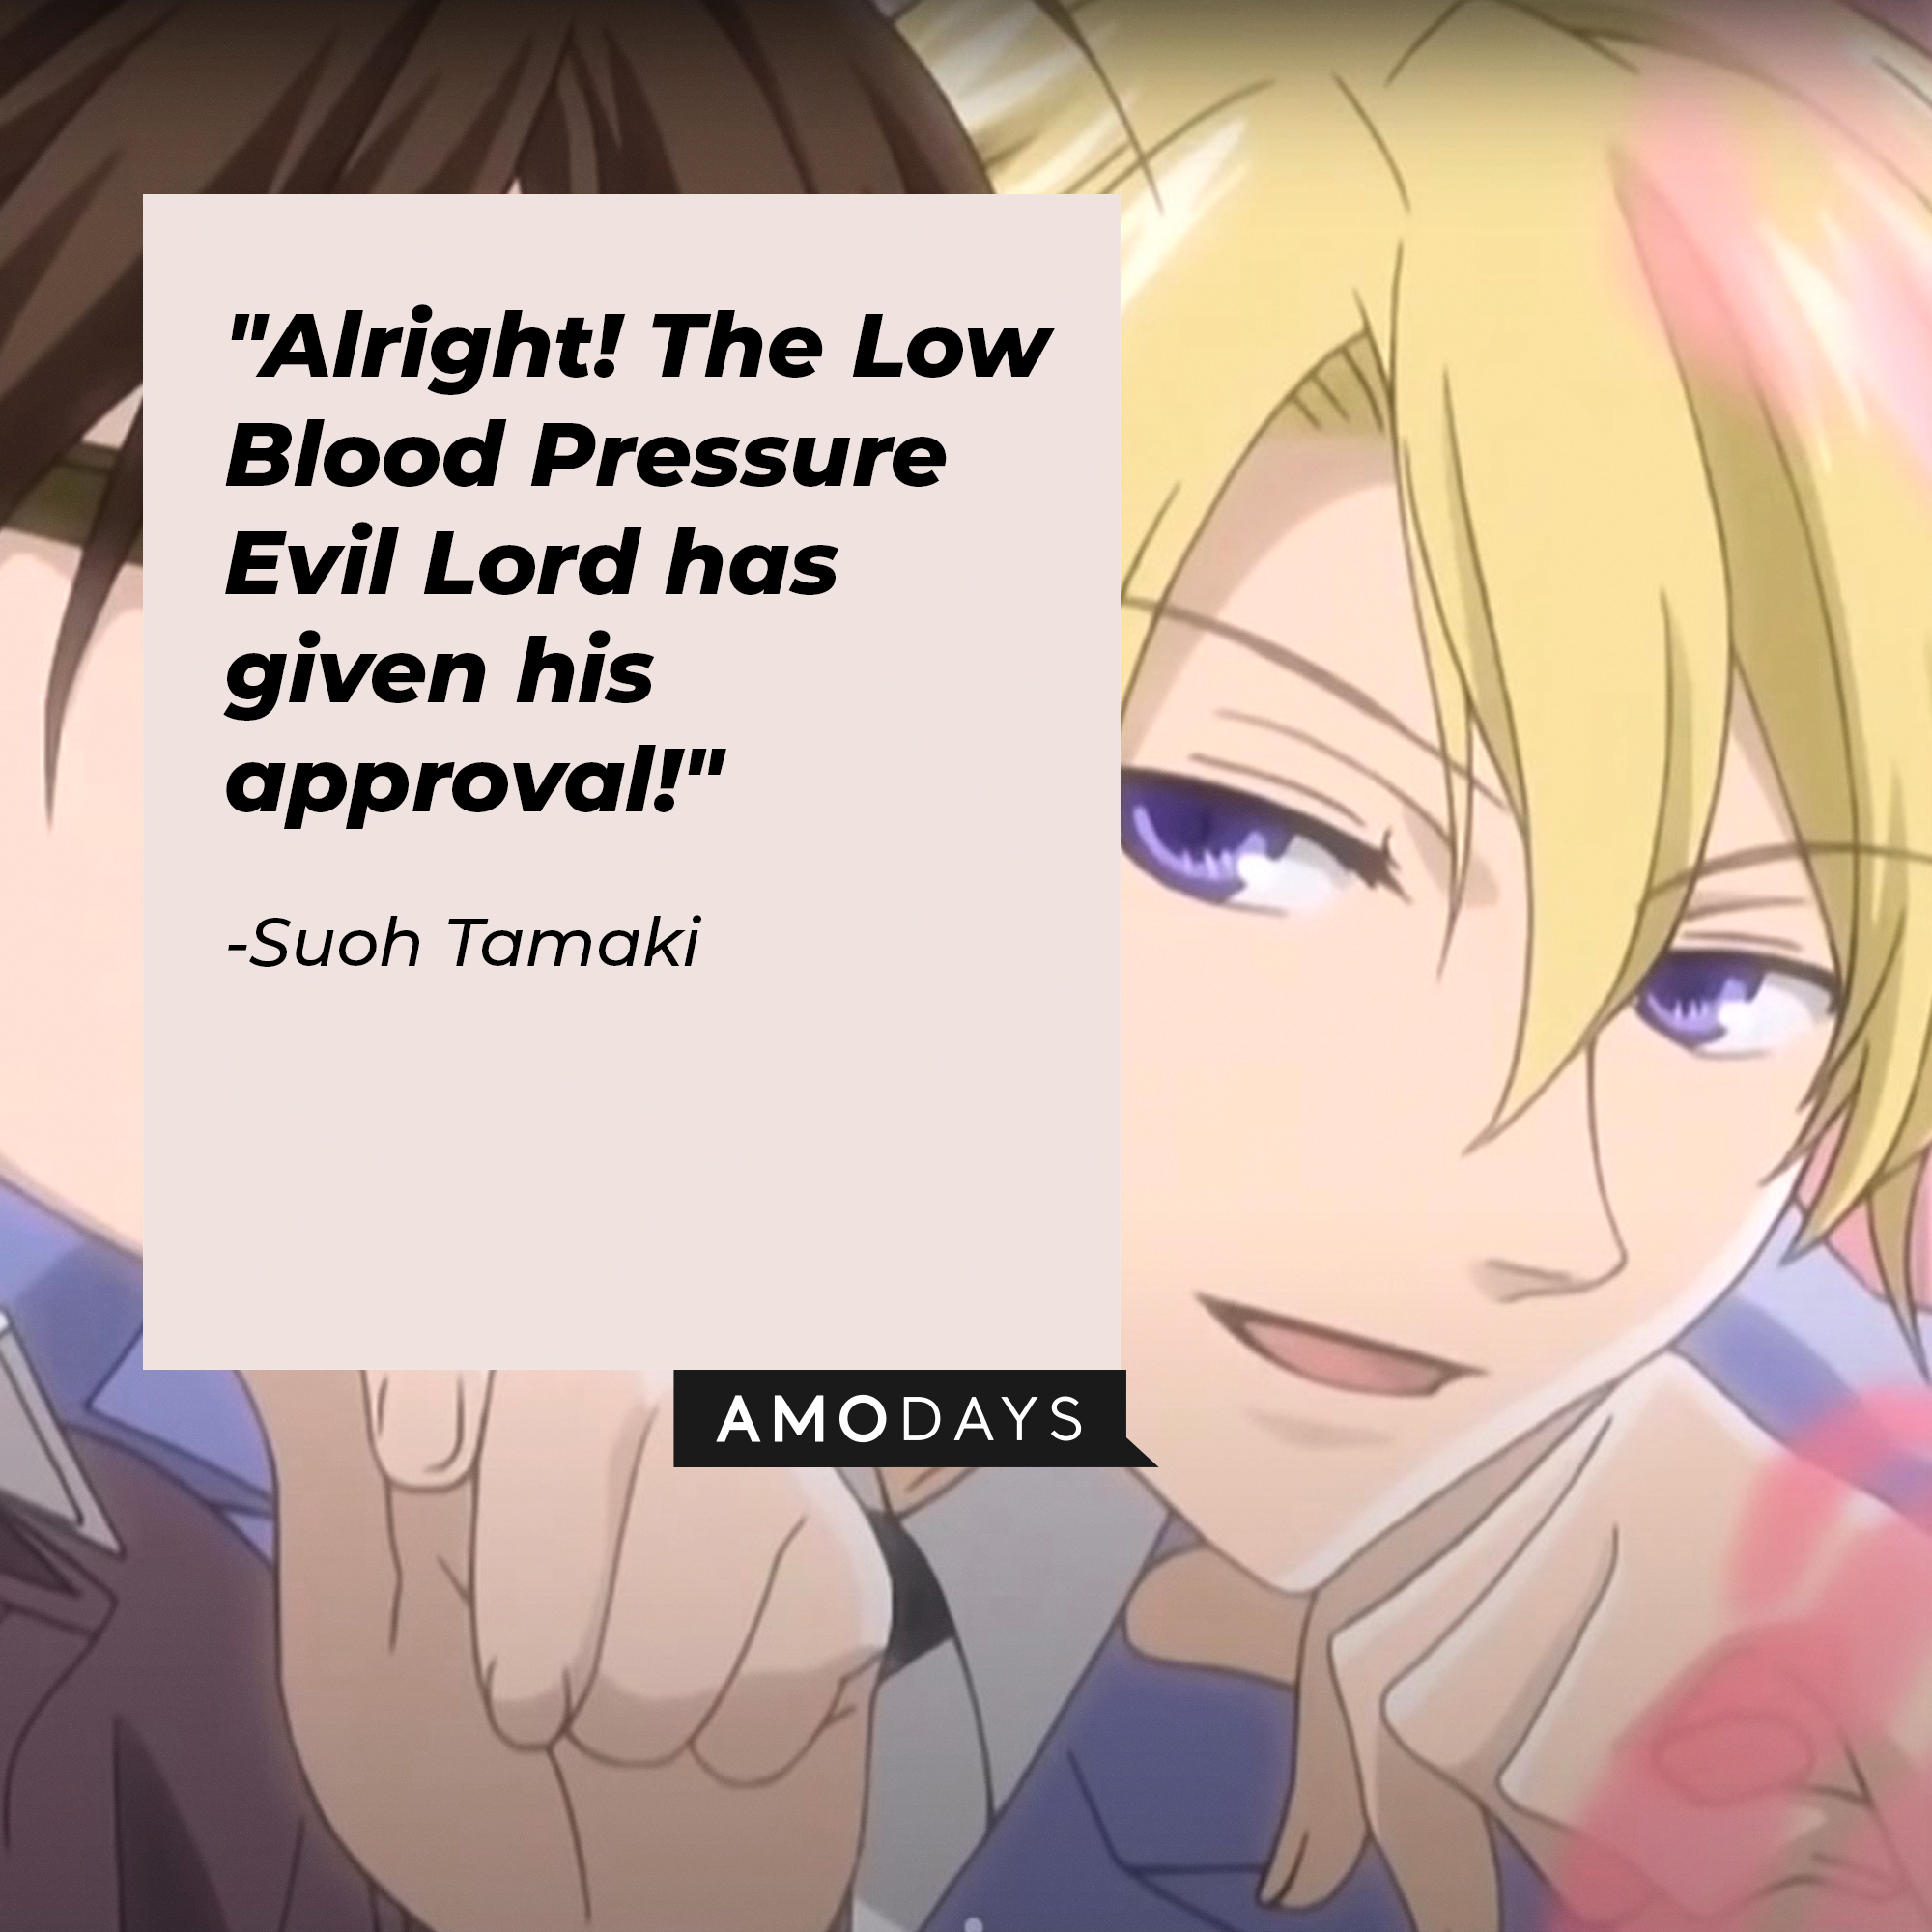 Suoh Tamaki's quote: "Alright! The Low Blood Pressure Evil Lord has given his approval!" | Source: Facebook.com/theouranhostclub